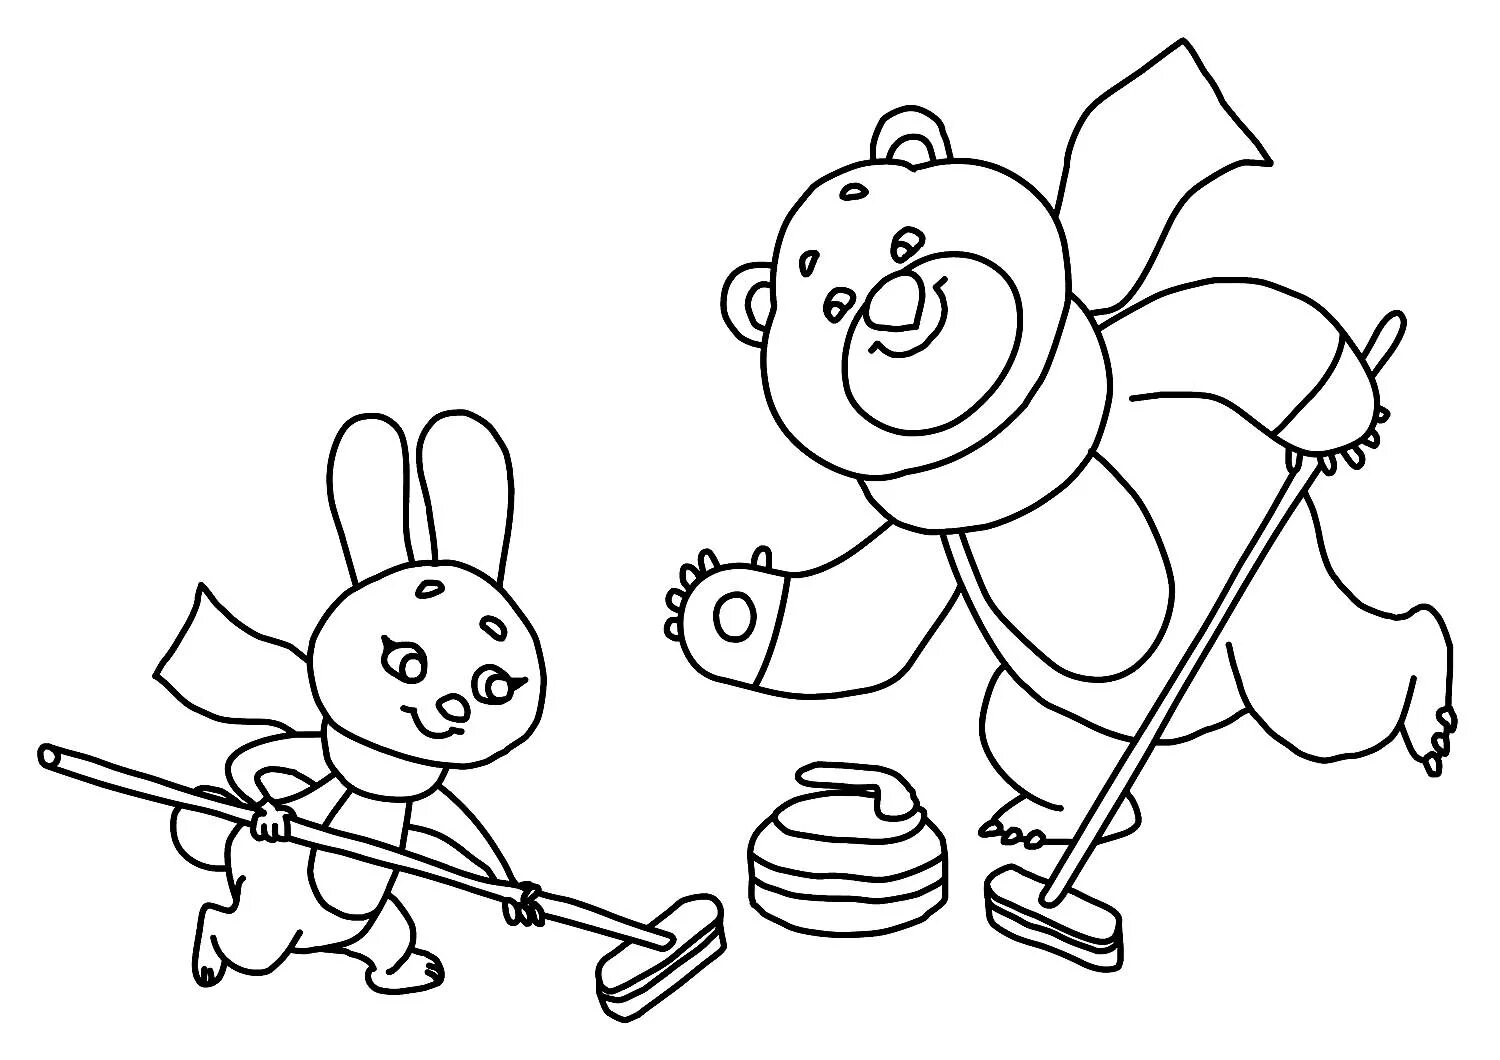 Olympic games for kids #3